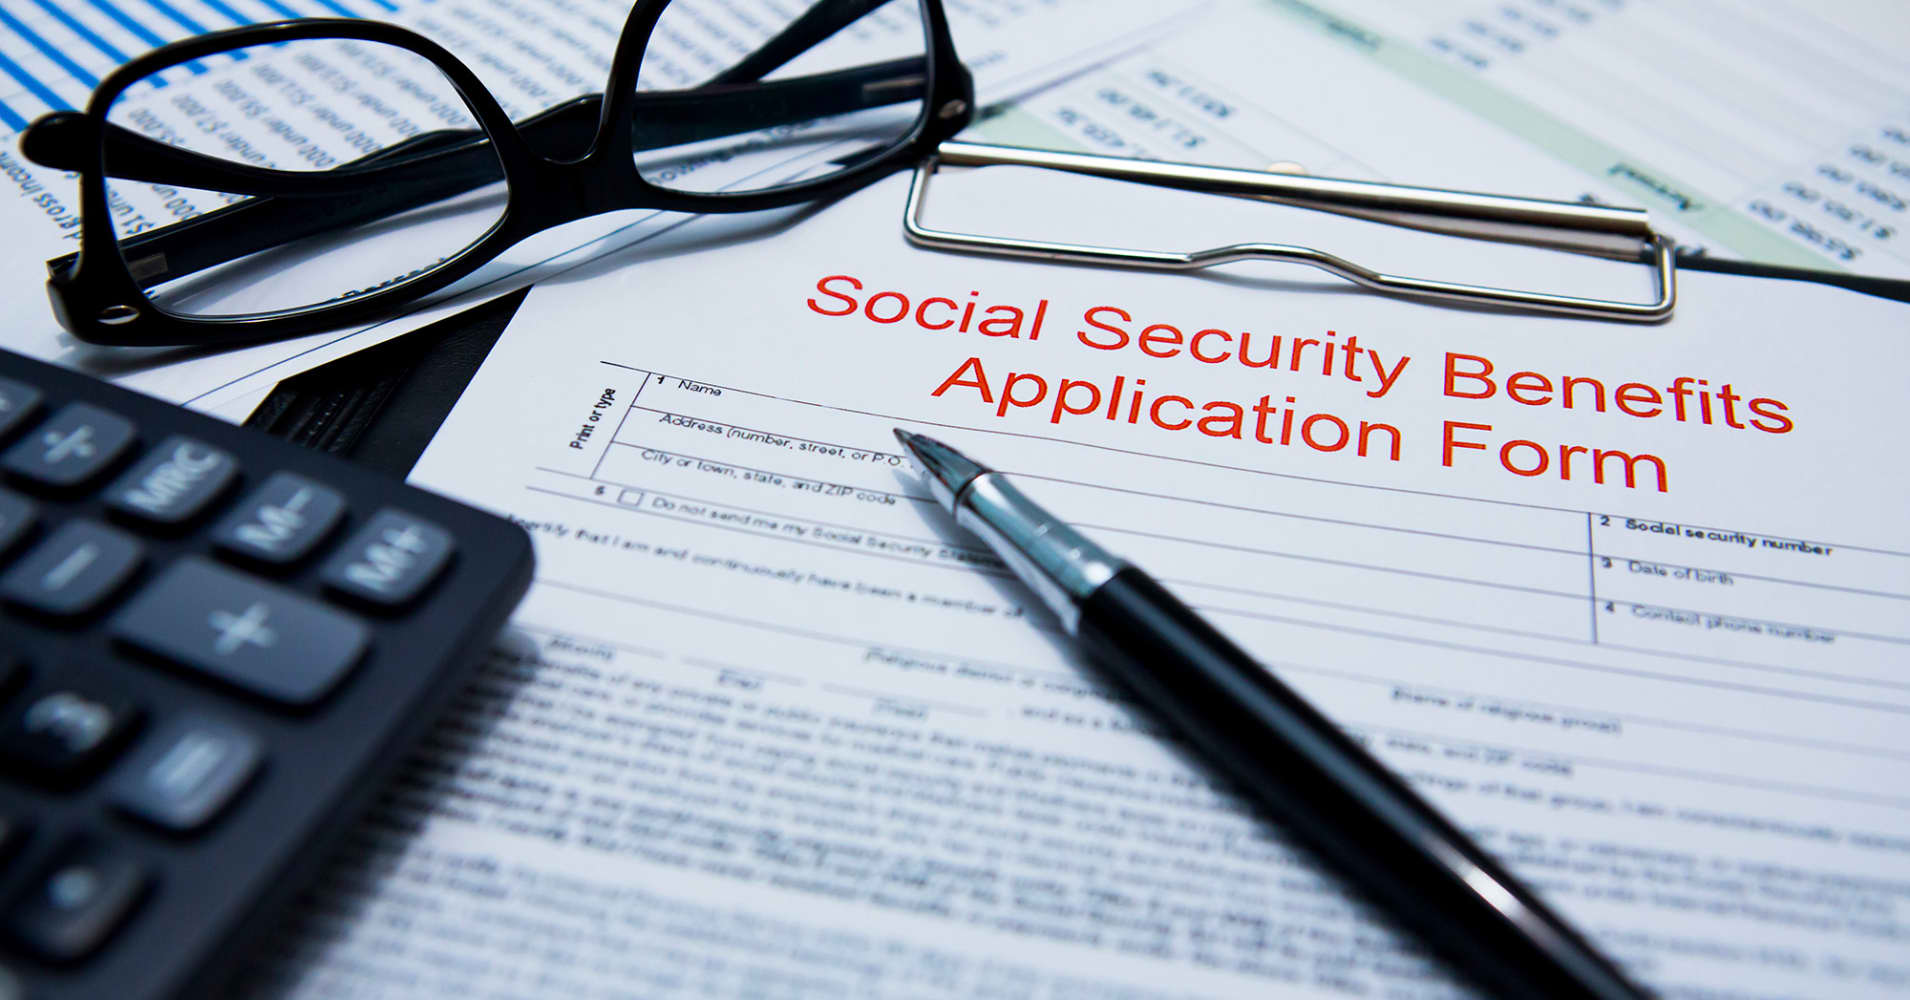 These free tools will calculate your Social Security benefits